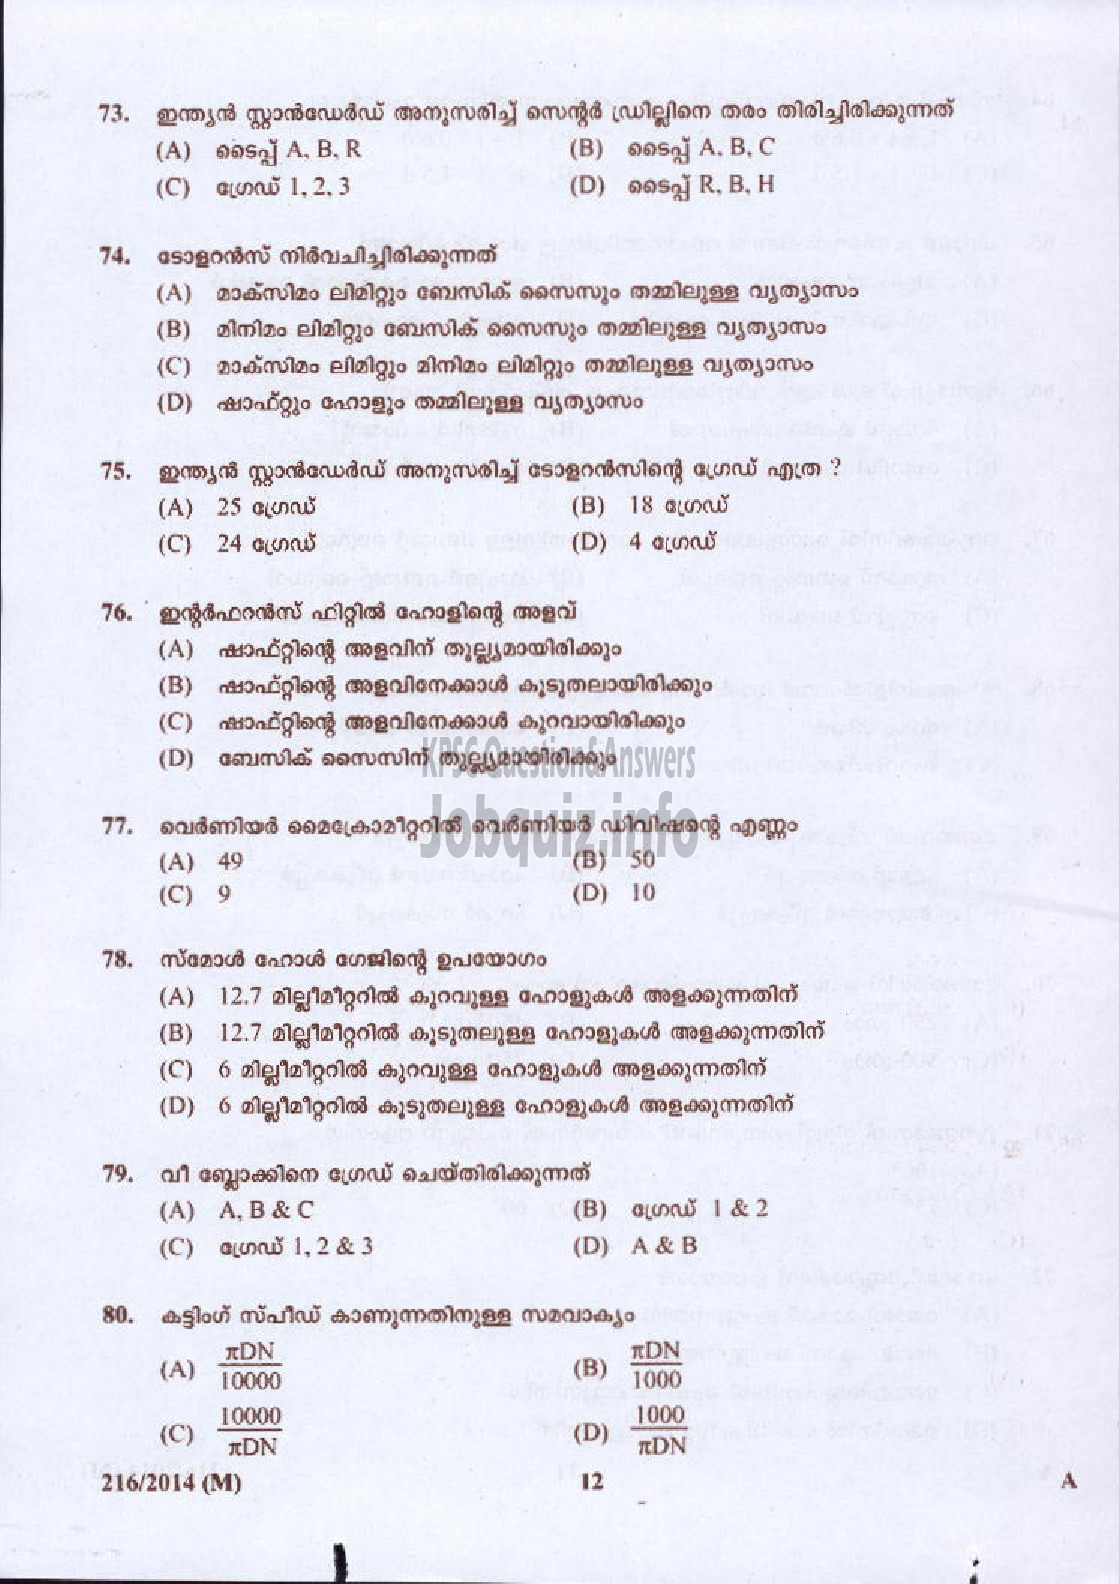 Kerala PSC Question Paper - FITTER AGRICULTURE-12